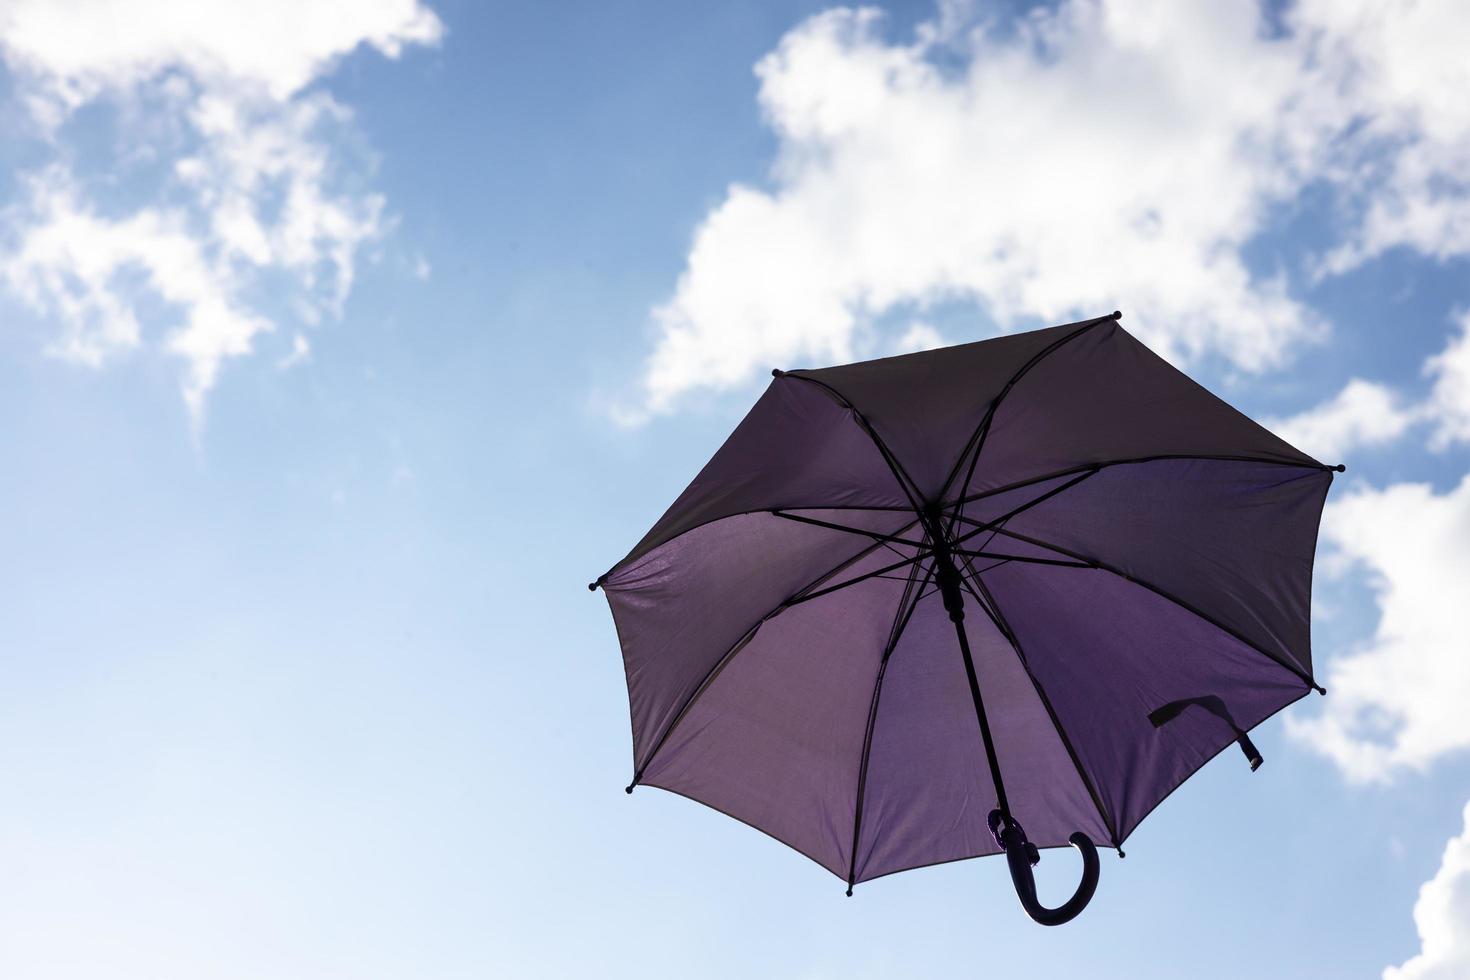 A close-up view from the low, a beautiful purple umbrella floating freely. photo